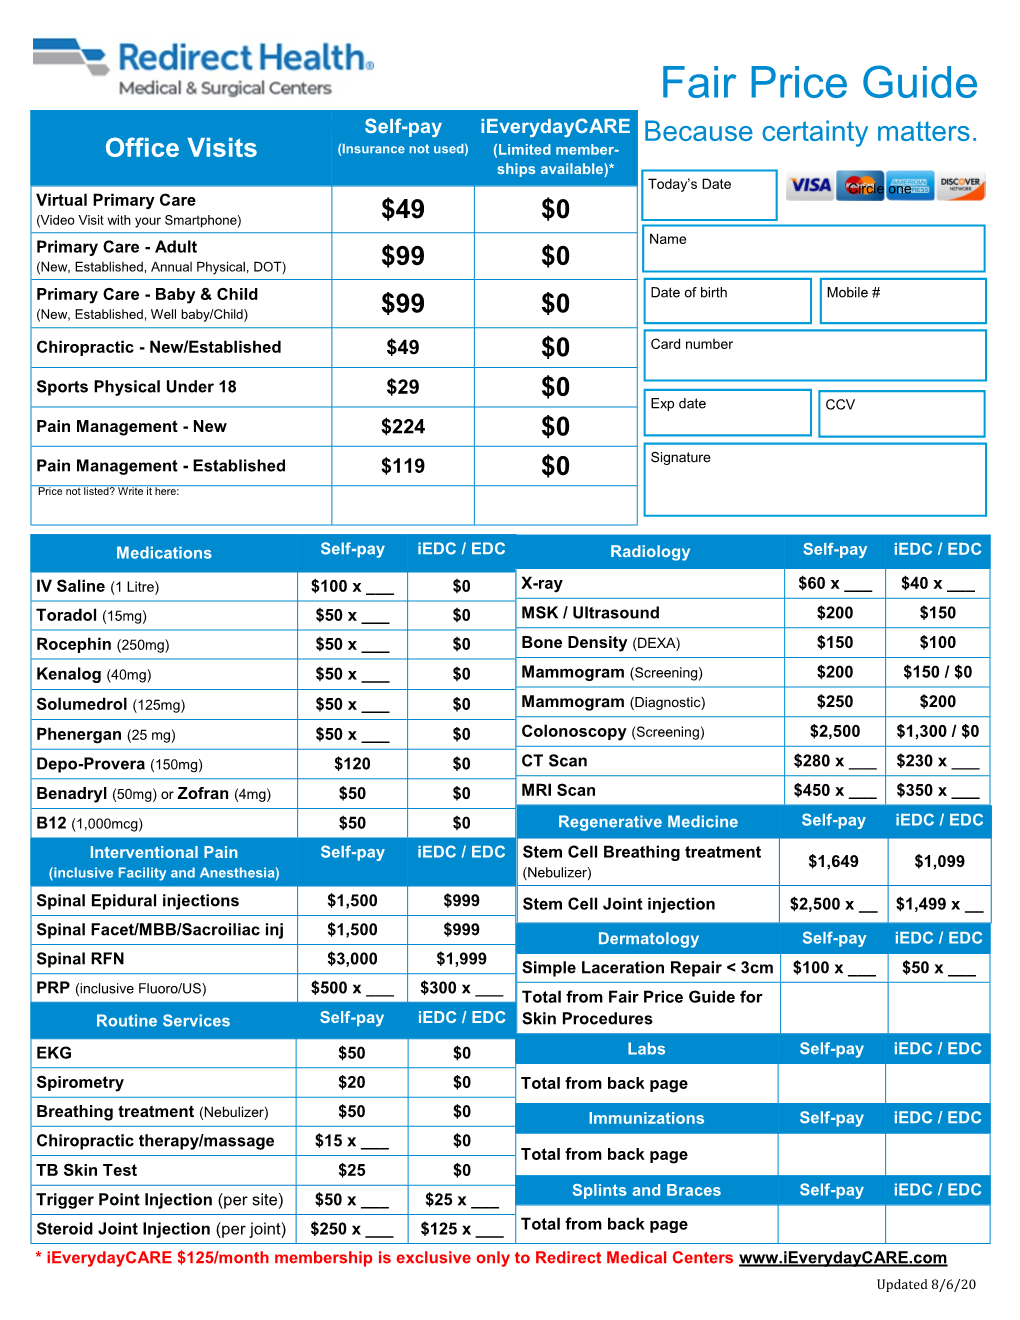 Fair Price Guide Arrowheadhealth.Com/Schedule Self-Pay Ieverydaycare Because Certainty Matters